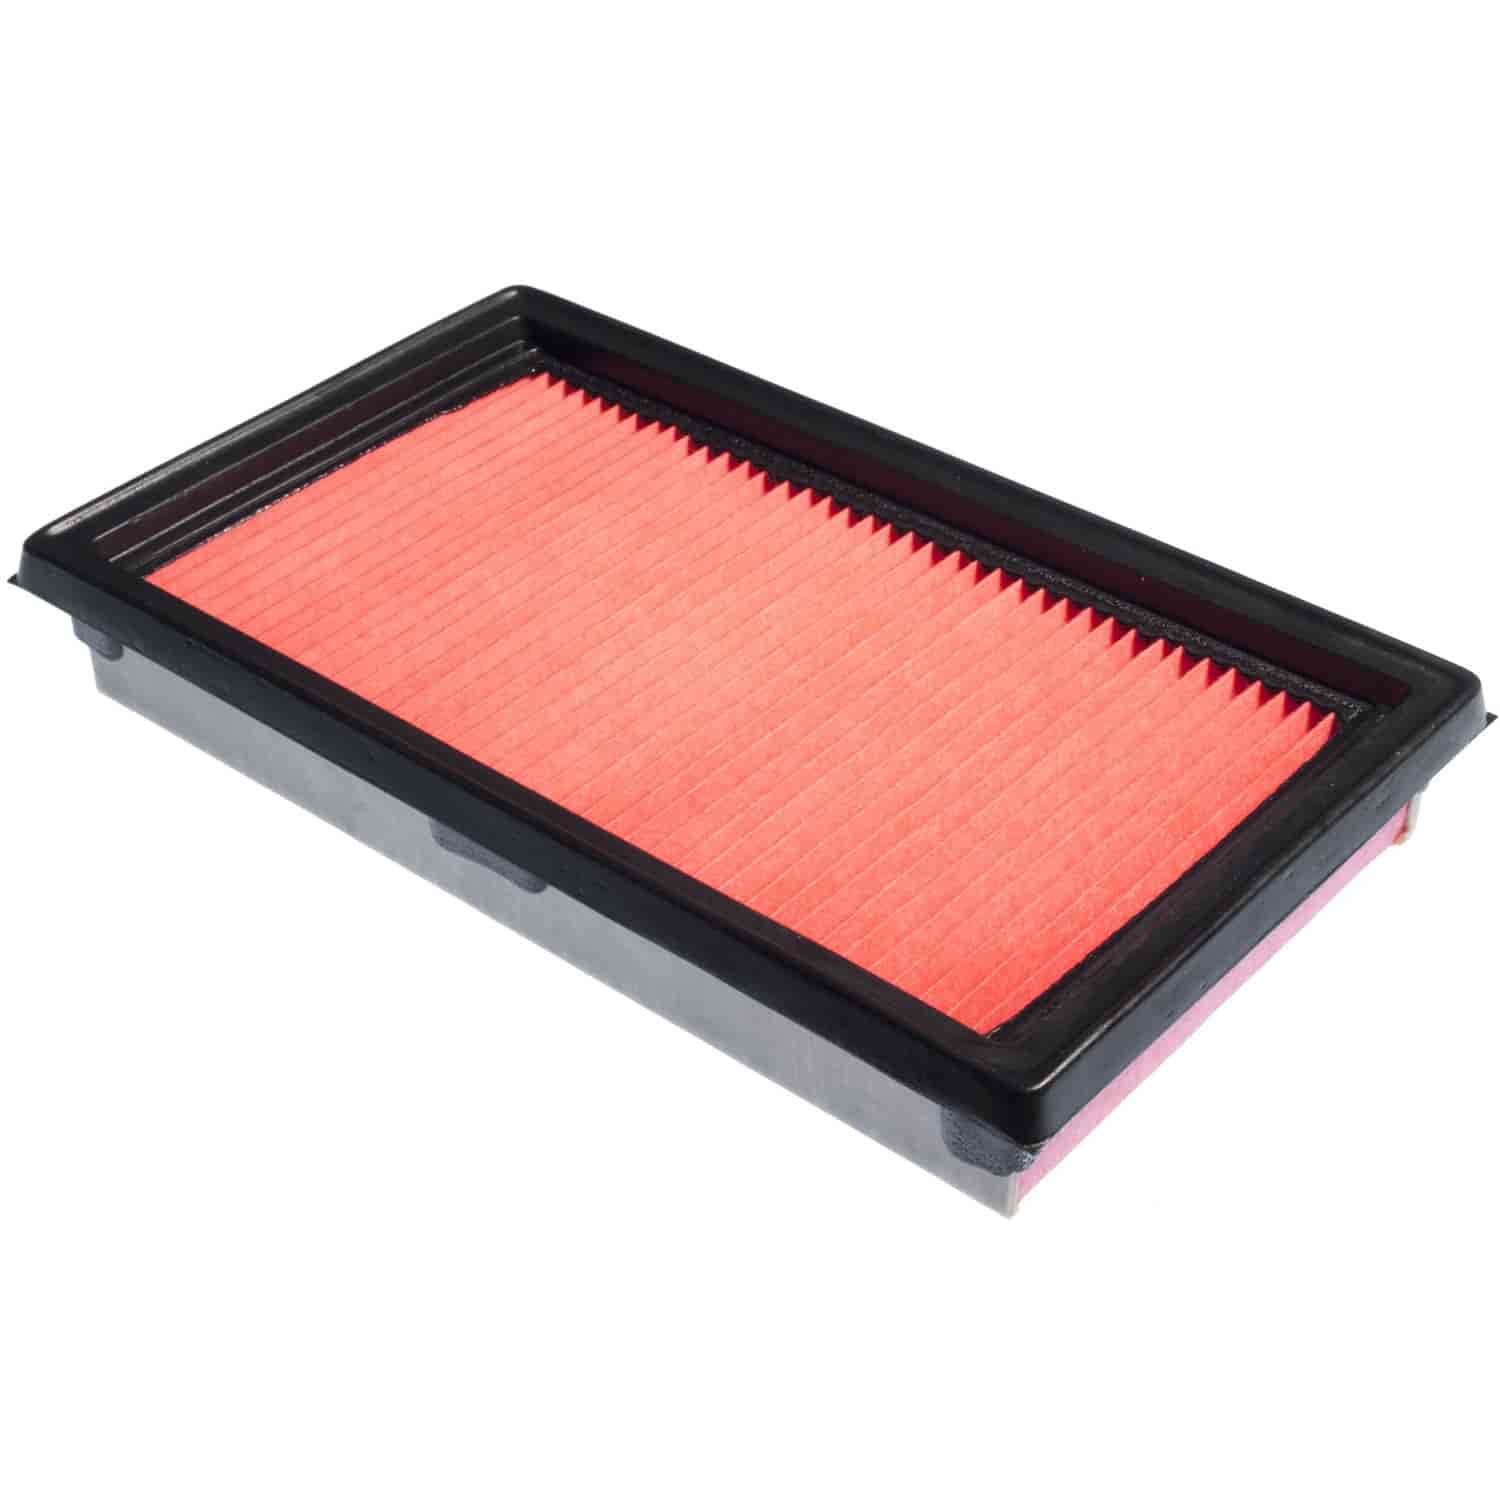 Mahle Air Filter for Nissan Versa and Cube